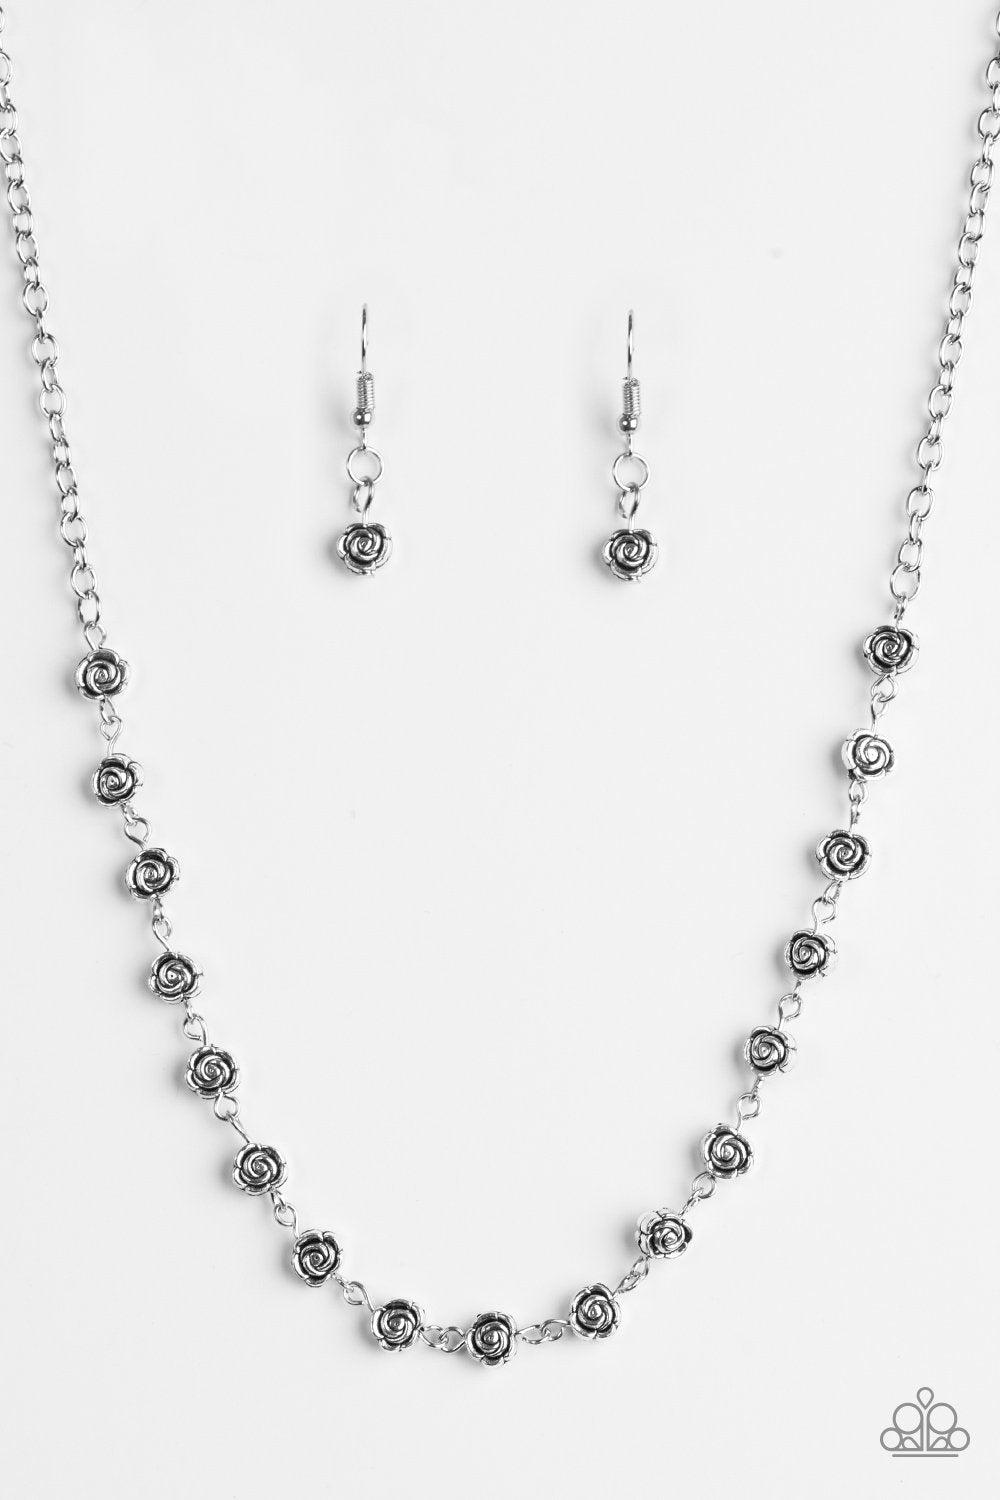 Roadside Roses Silver Necklace - Paparazzi Accessories-CarasShop.com - $5 Jewelry by Cara Jewels